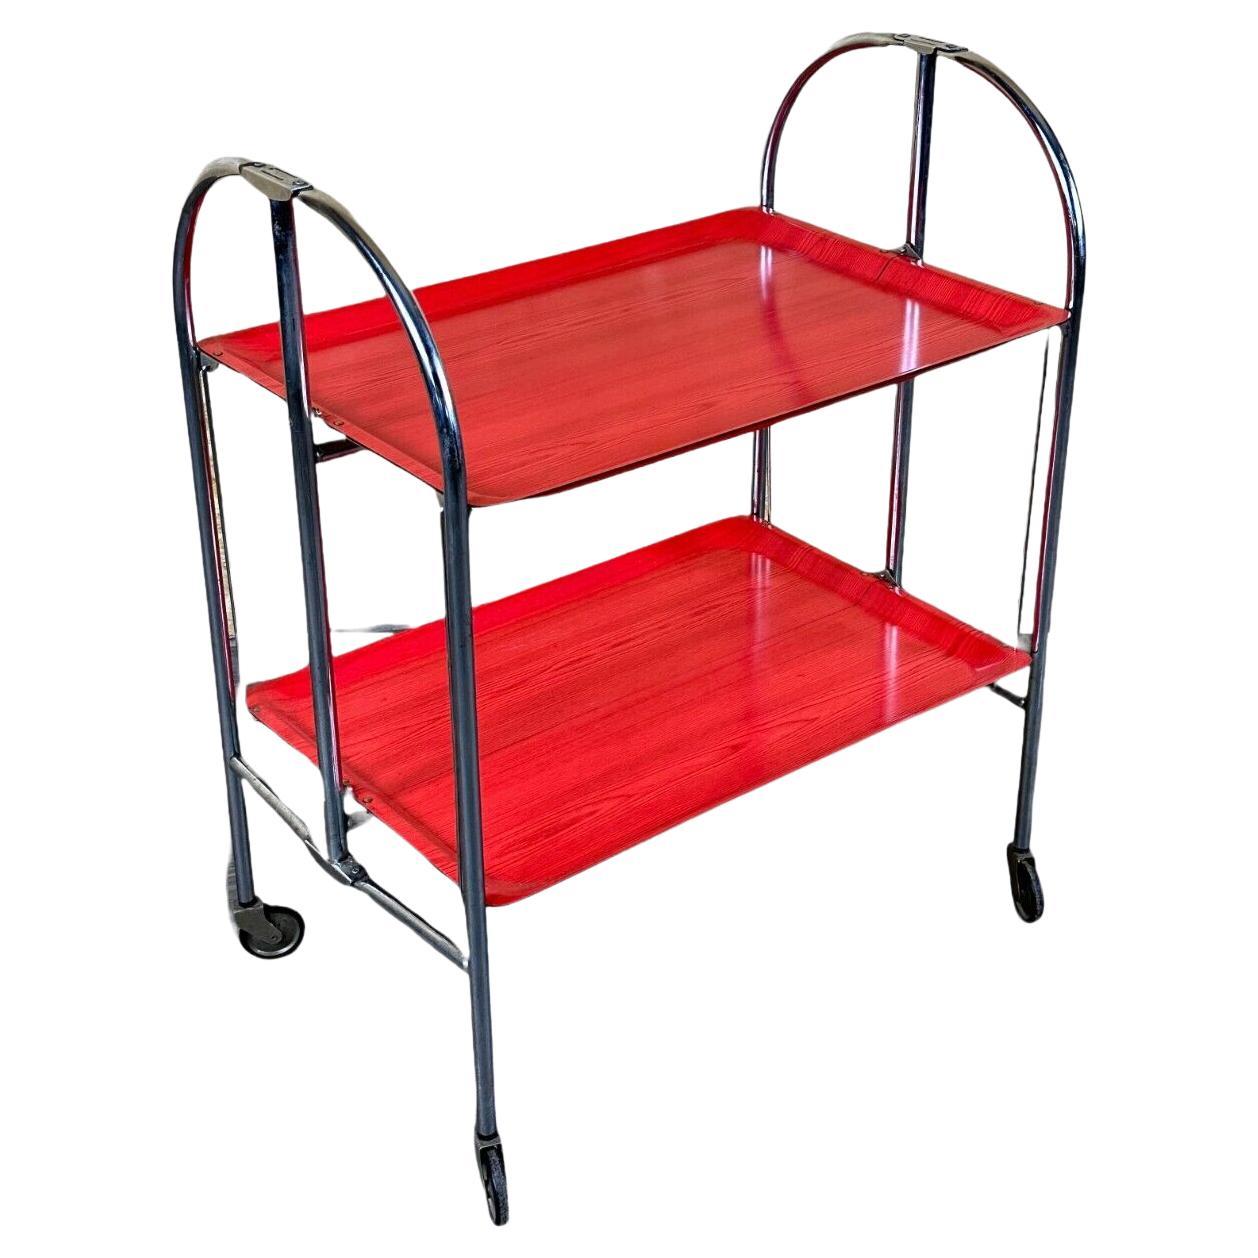 60s 70s serving trolley dinette side table space age red design For Sale